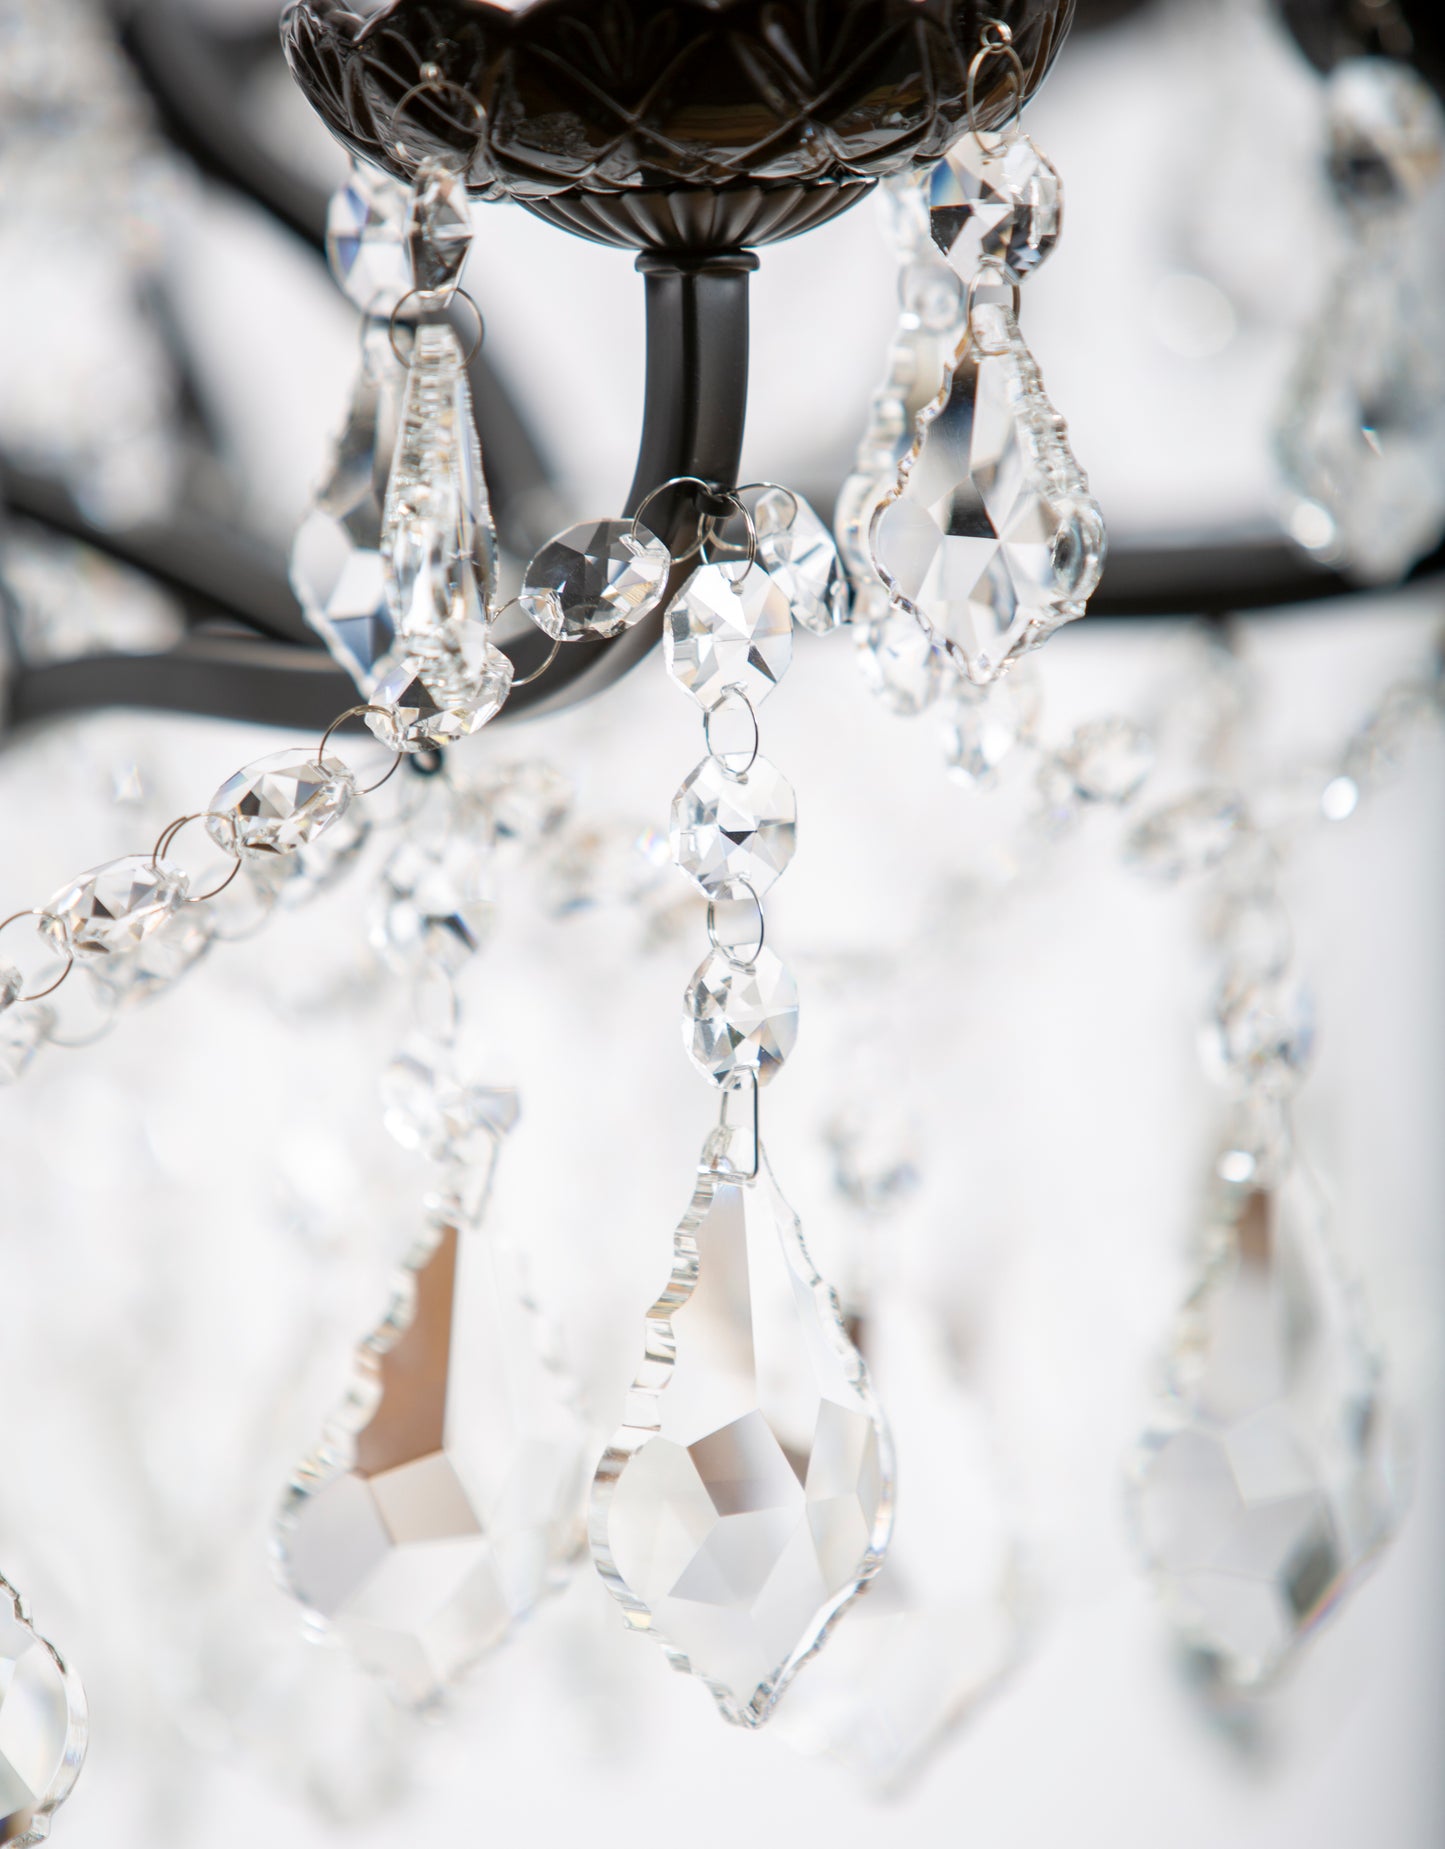 Large 12 Branch Shallow Chandelier